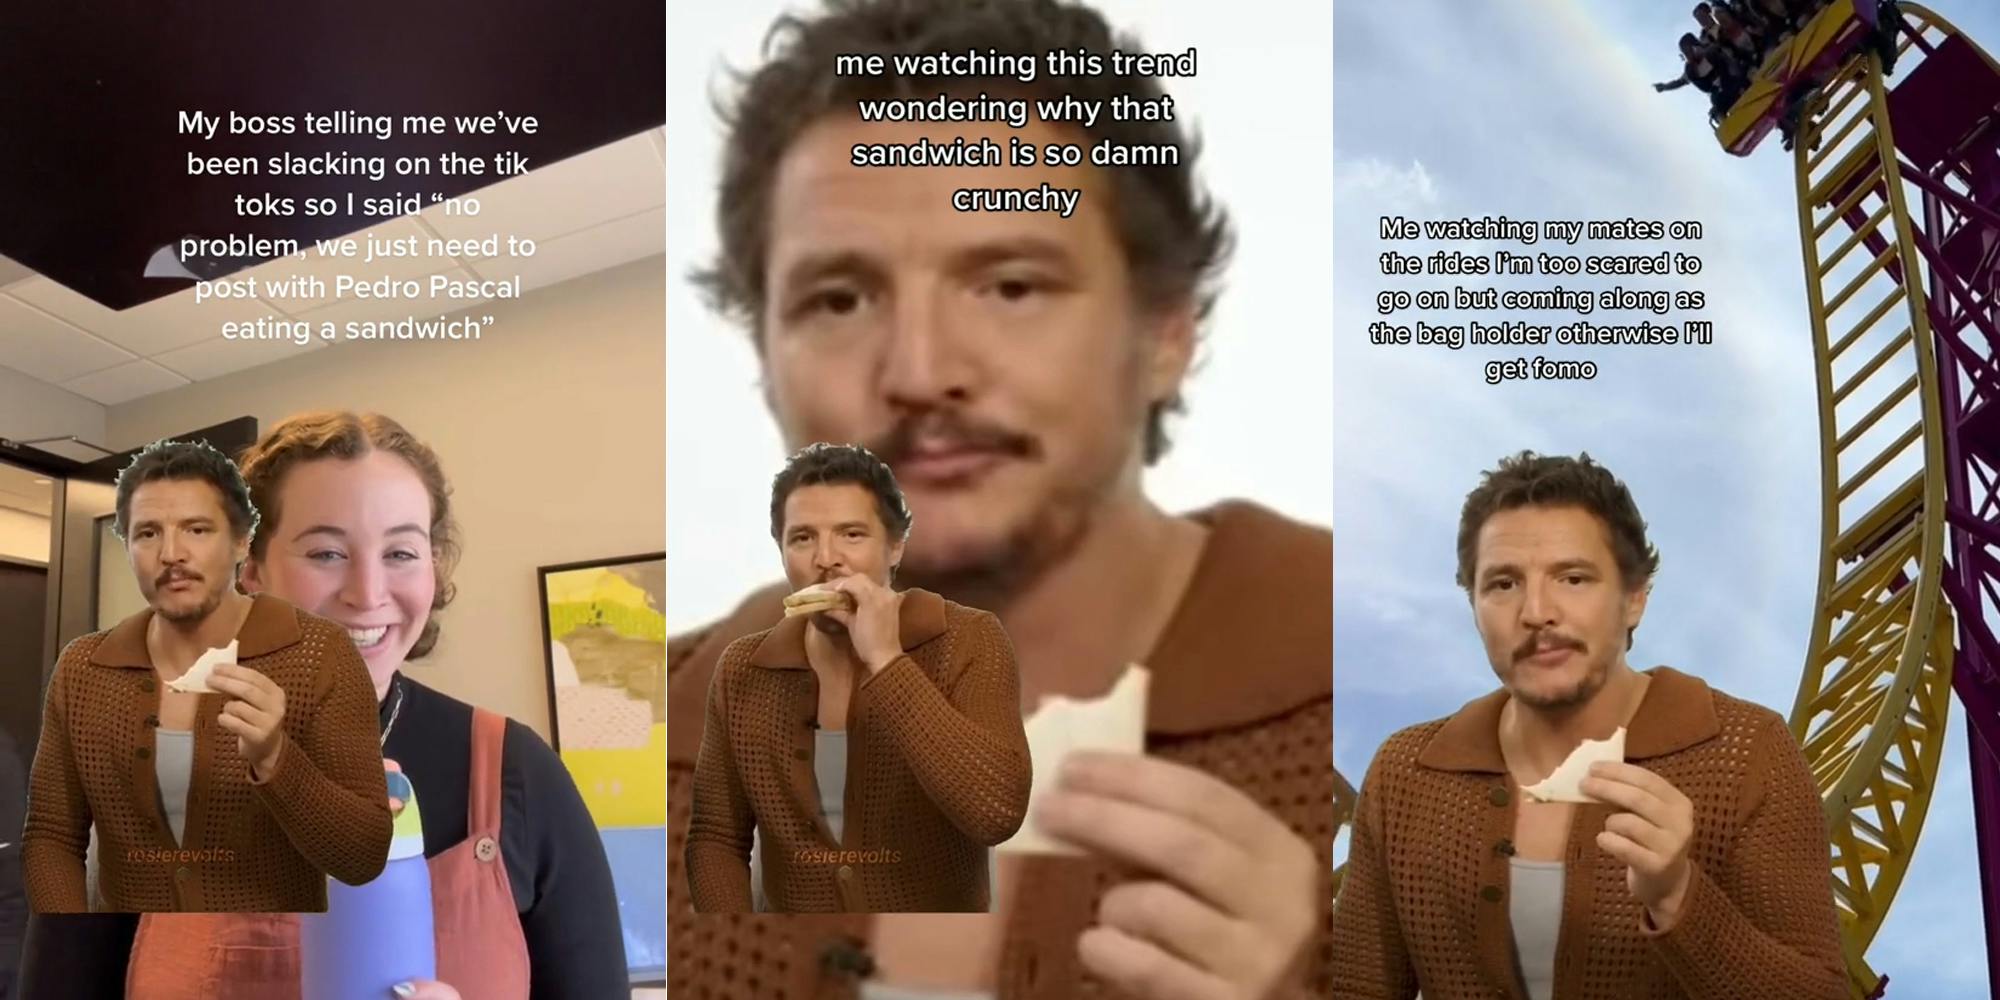 person with Pedro Pascal eating sandwich with caption 'My boss telling me we've been slacking on the tiktoks so I said 'no problem, we just need to post with Pedro Pascal eating a sandwich' (l) Pedro Pascal eating a sandwich with caption 'me watching this trend wondering why that sandwich is so damn crunchy' (c) roller coaster with Pedro Pascal eating sandwich with caption 'Me watching my mates on the rides I'm too scared to go on but coming along as the bag holder otherwise I'll get fomo' (r)